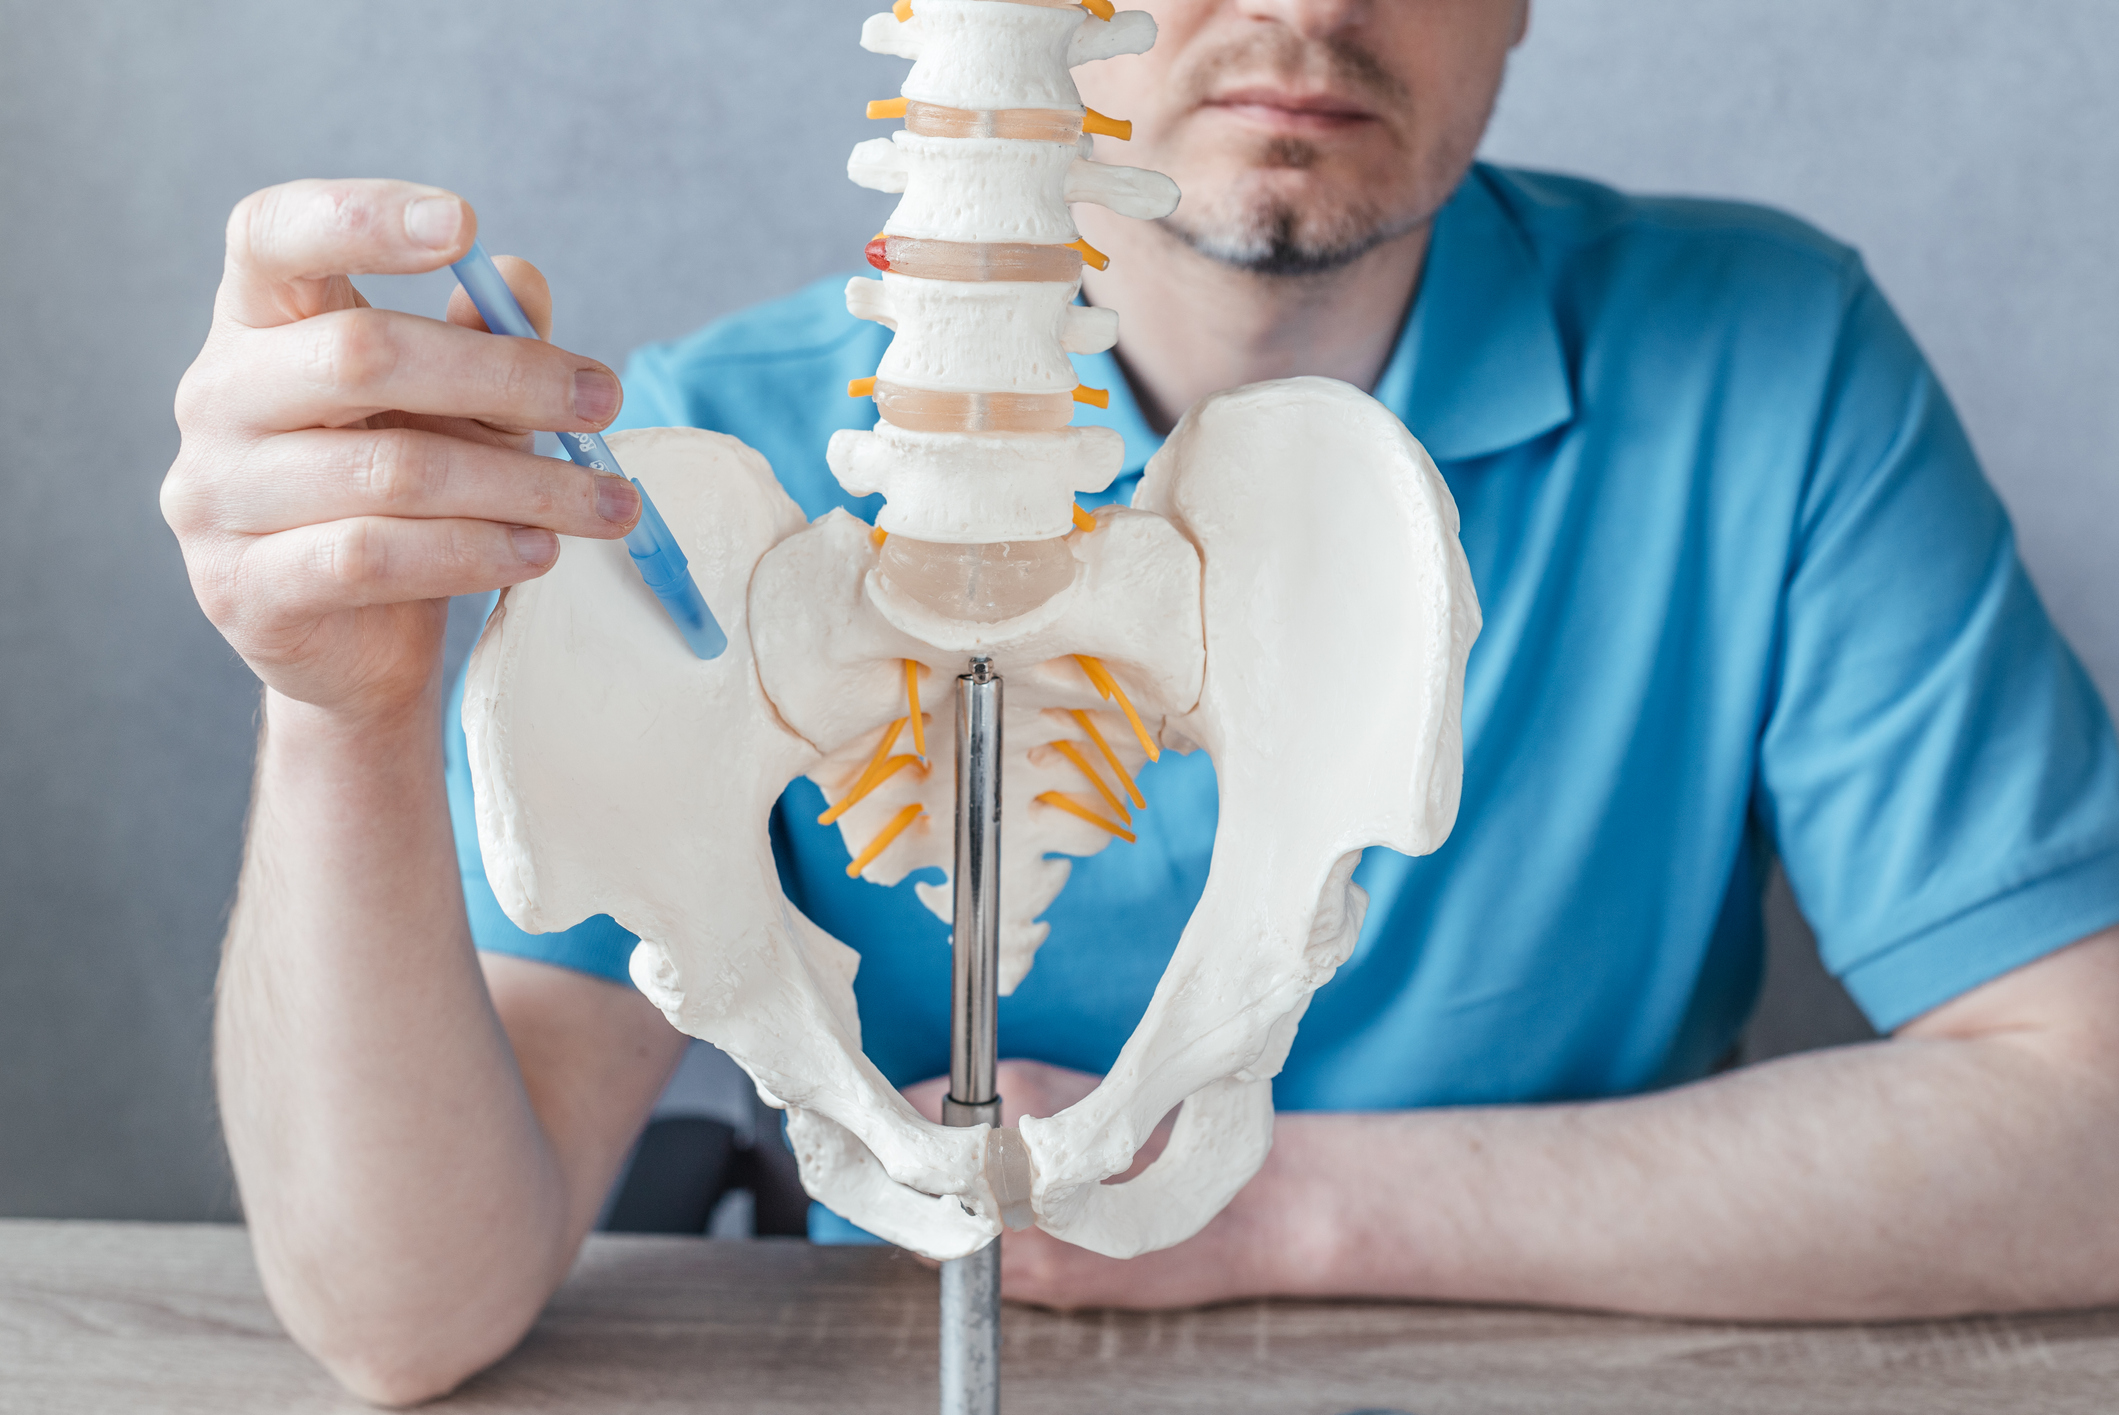 https://images.ctfassets.net/222znibi5gto/6lylBQkwbzcxEsMLYDvHqY/3ce740113bce74ae2f08057c68e068a8/Sacroiliac-Joint-Dysfunction-Treatment-Update.jpg